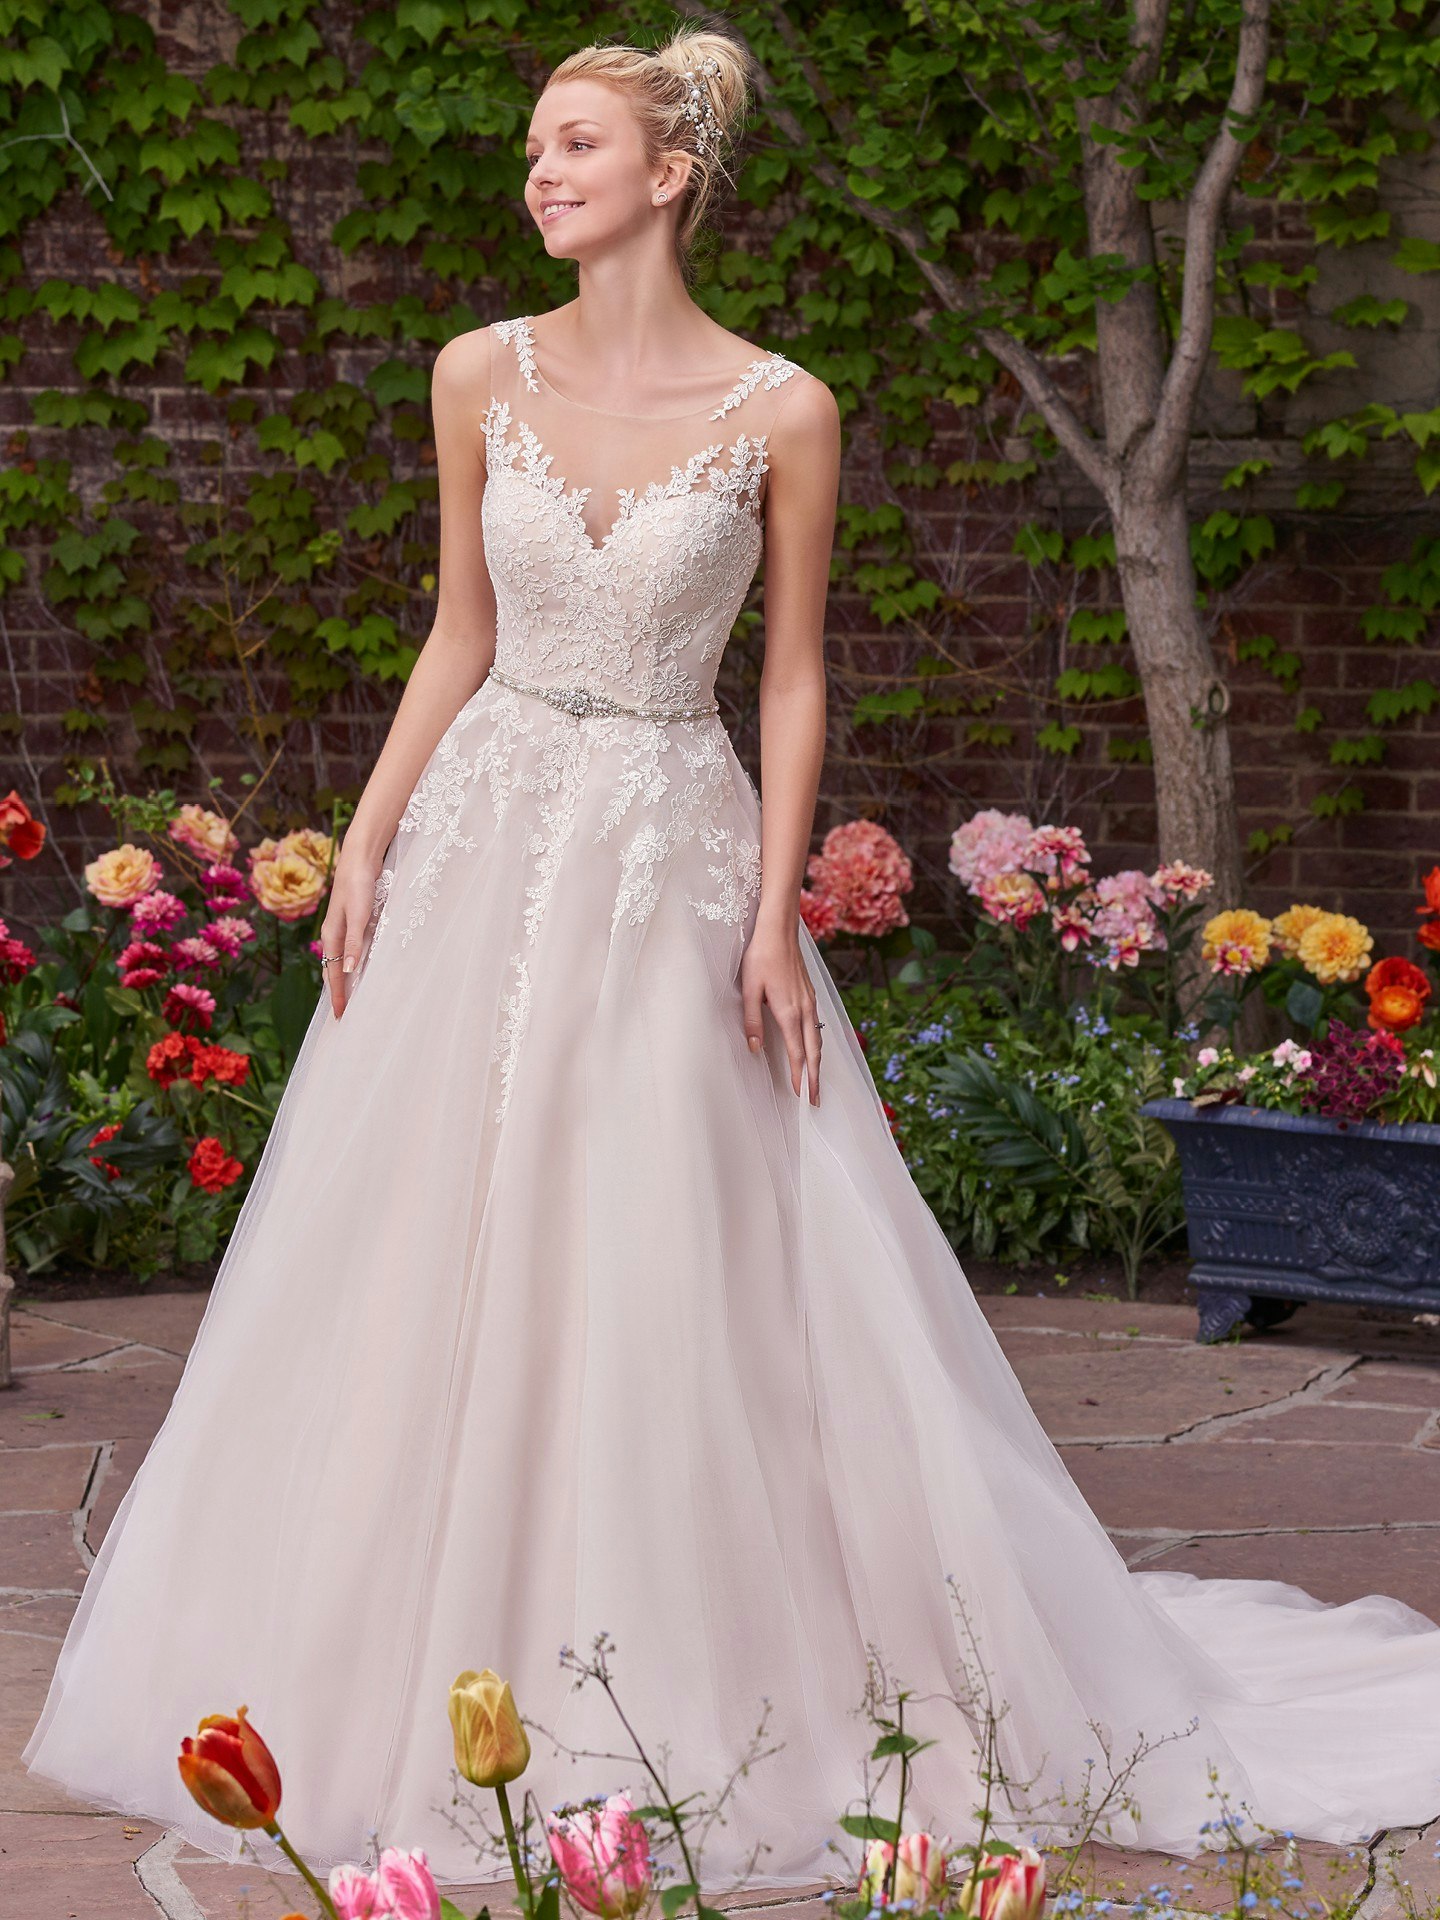 Olivia Tulle Ball Gown Wedding Dress ...